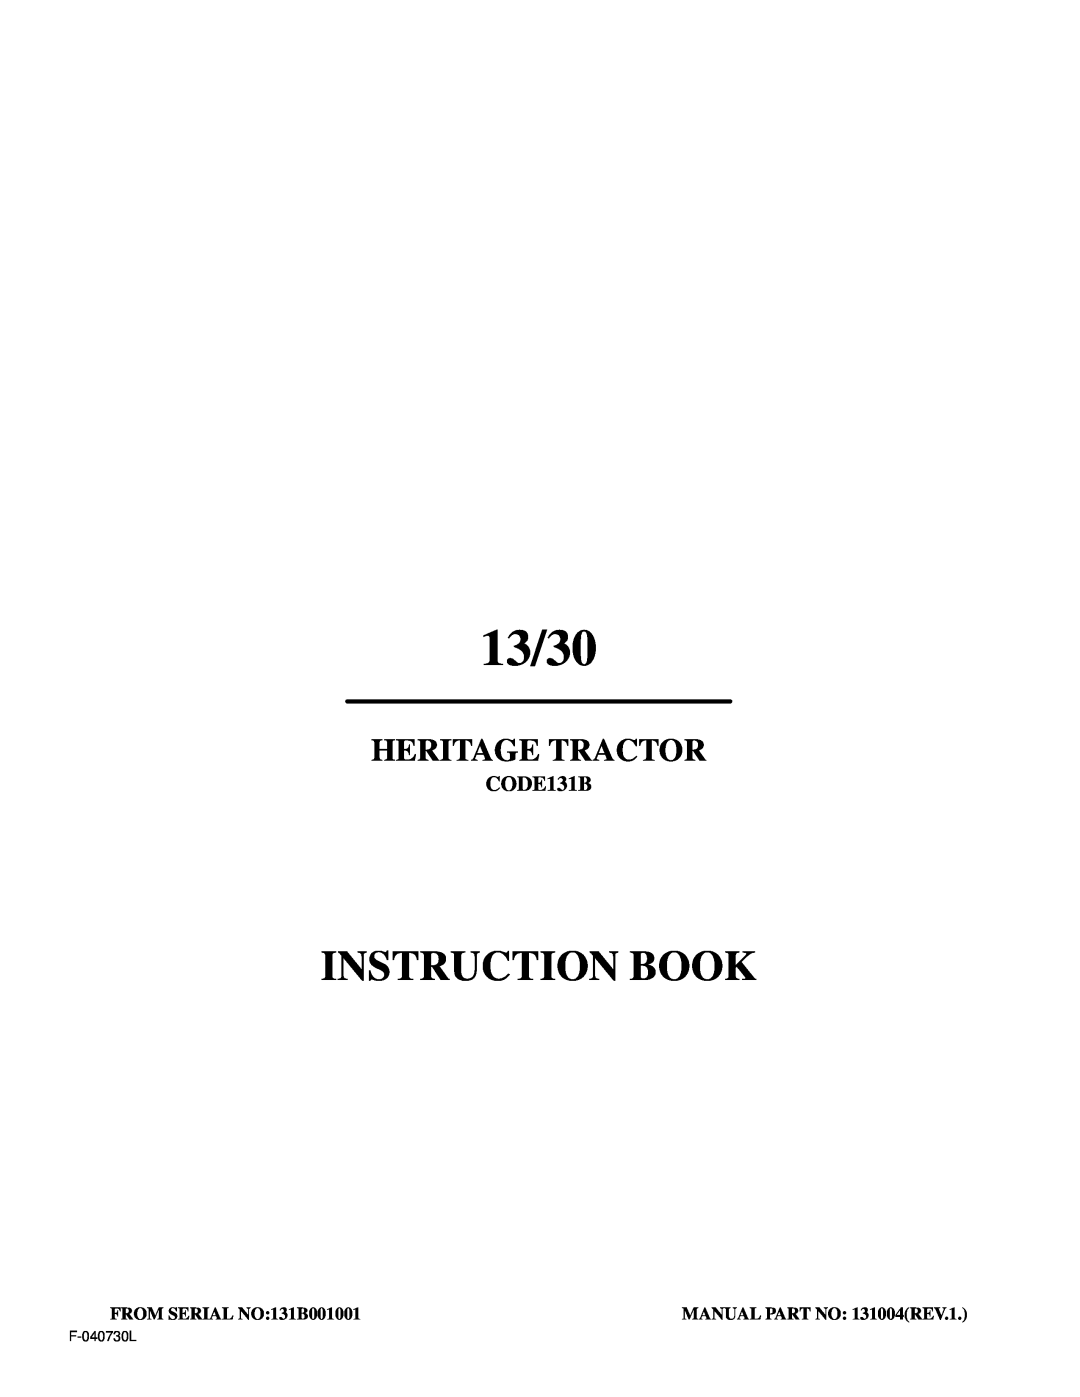 Hayter Mowers manual 13/30, Instruction Book, Heritage Tractor, CODE131B, FROM SERIAL NO131B001001 